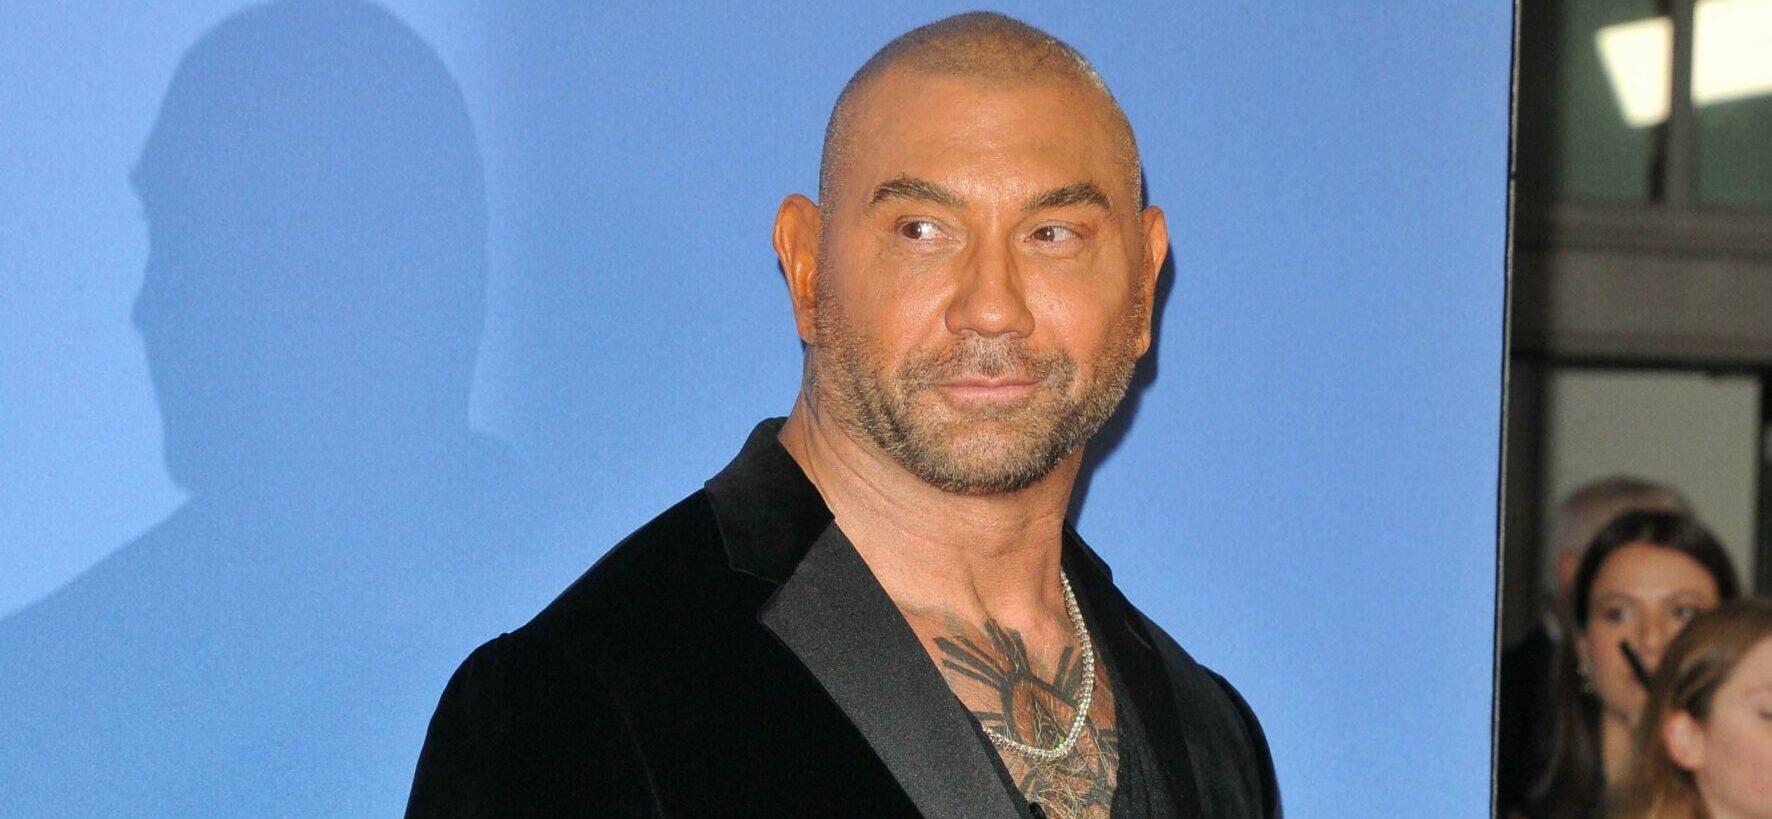 Dave Bautista Happy To Move On From ‘Guardians Of The Galaxy’ Role, Not His ‘Legacy’